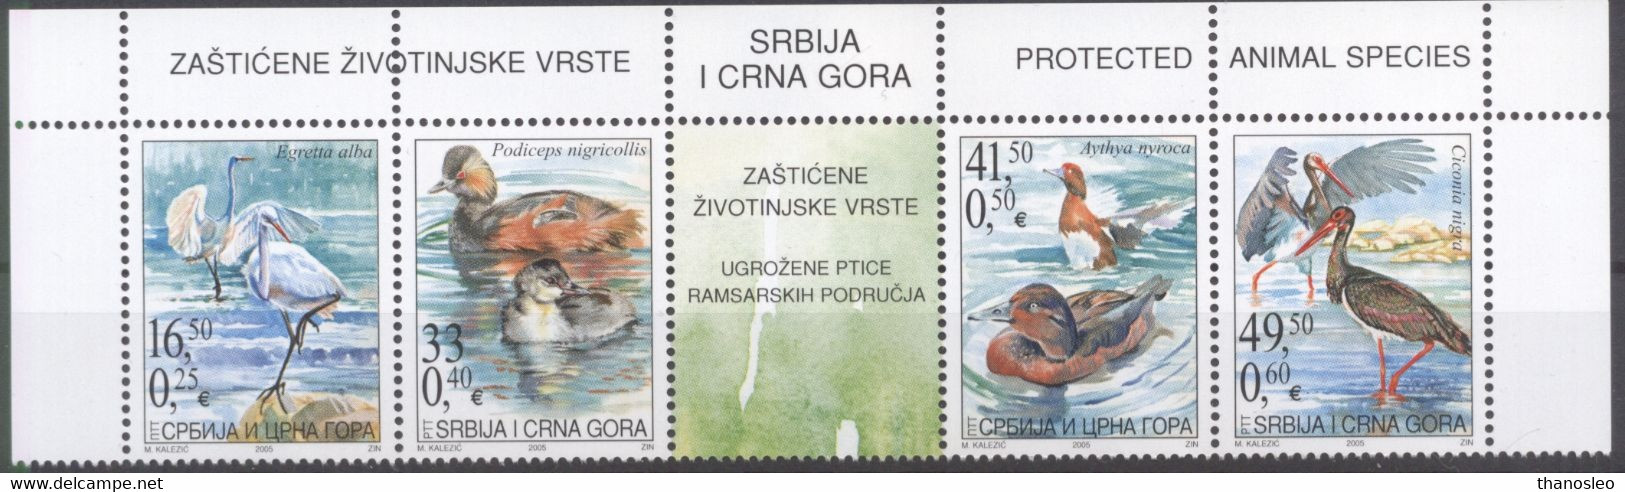 Serbia And Montenegro 2005  Protected Animal Species MNH VF - Serbie